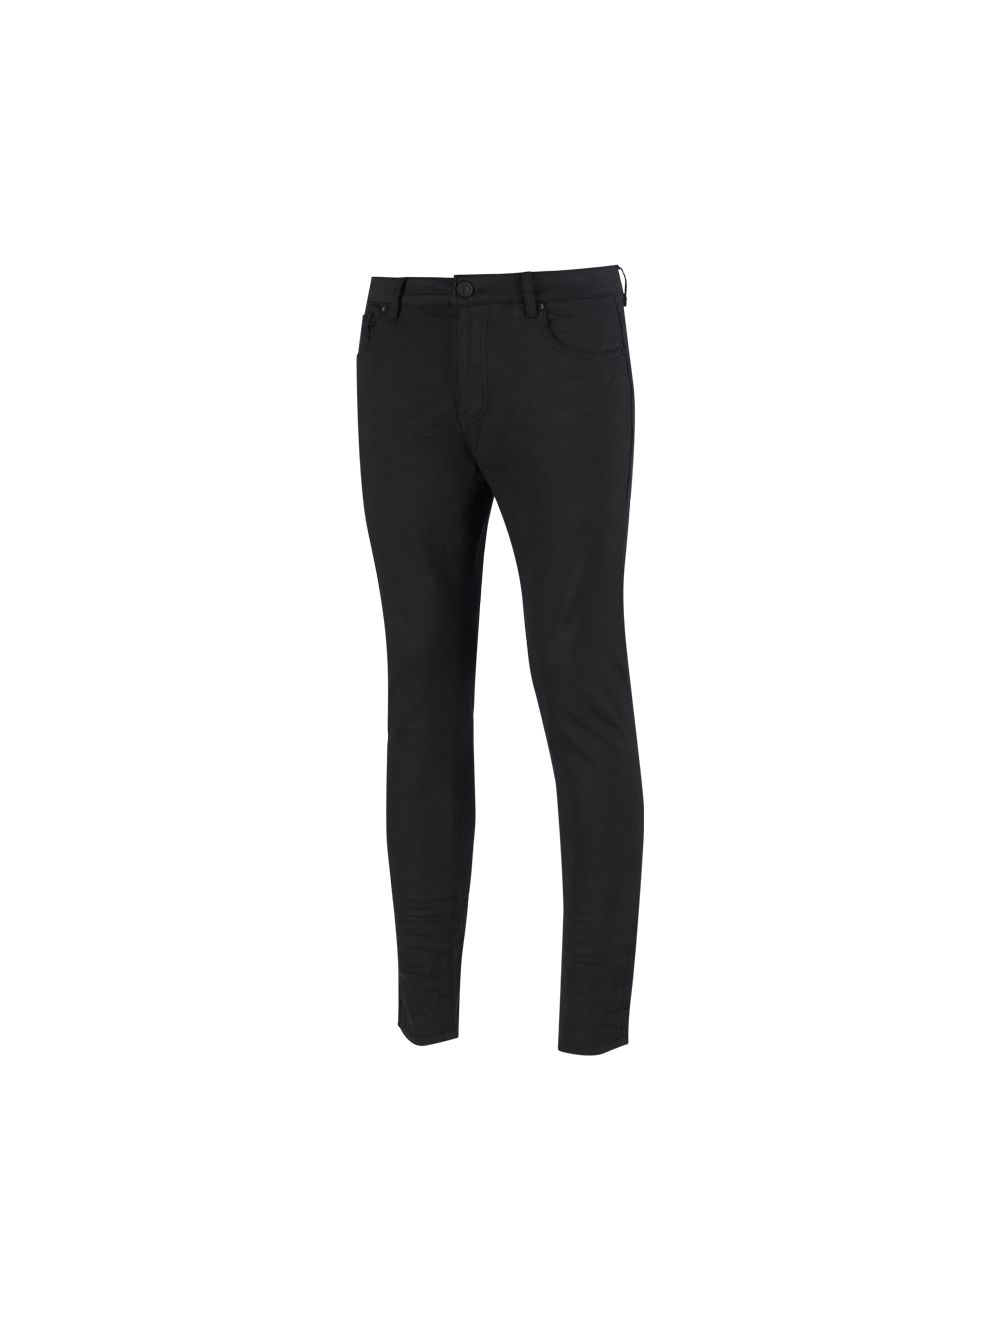 Guess Mens Coated Skinny Jeans : Amazon.ca: Clothing, Shoes & Accessories